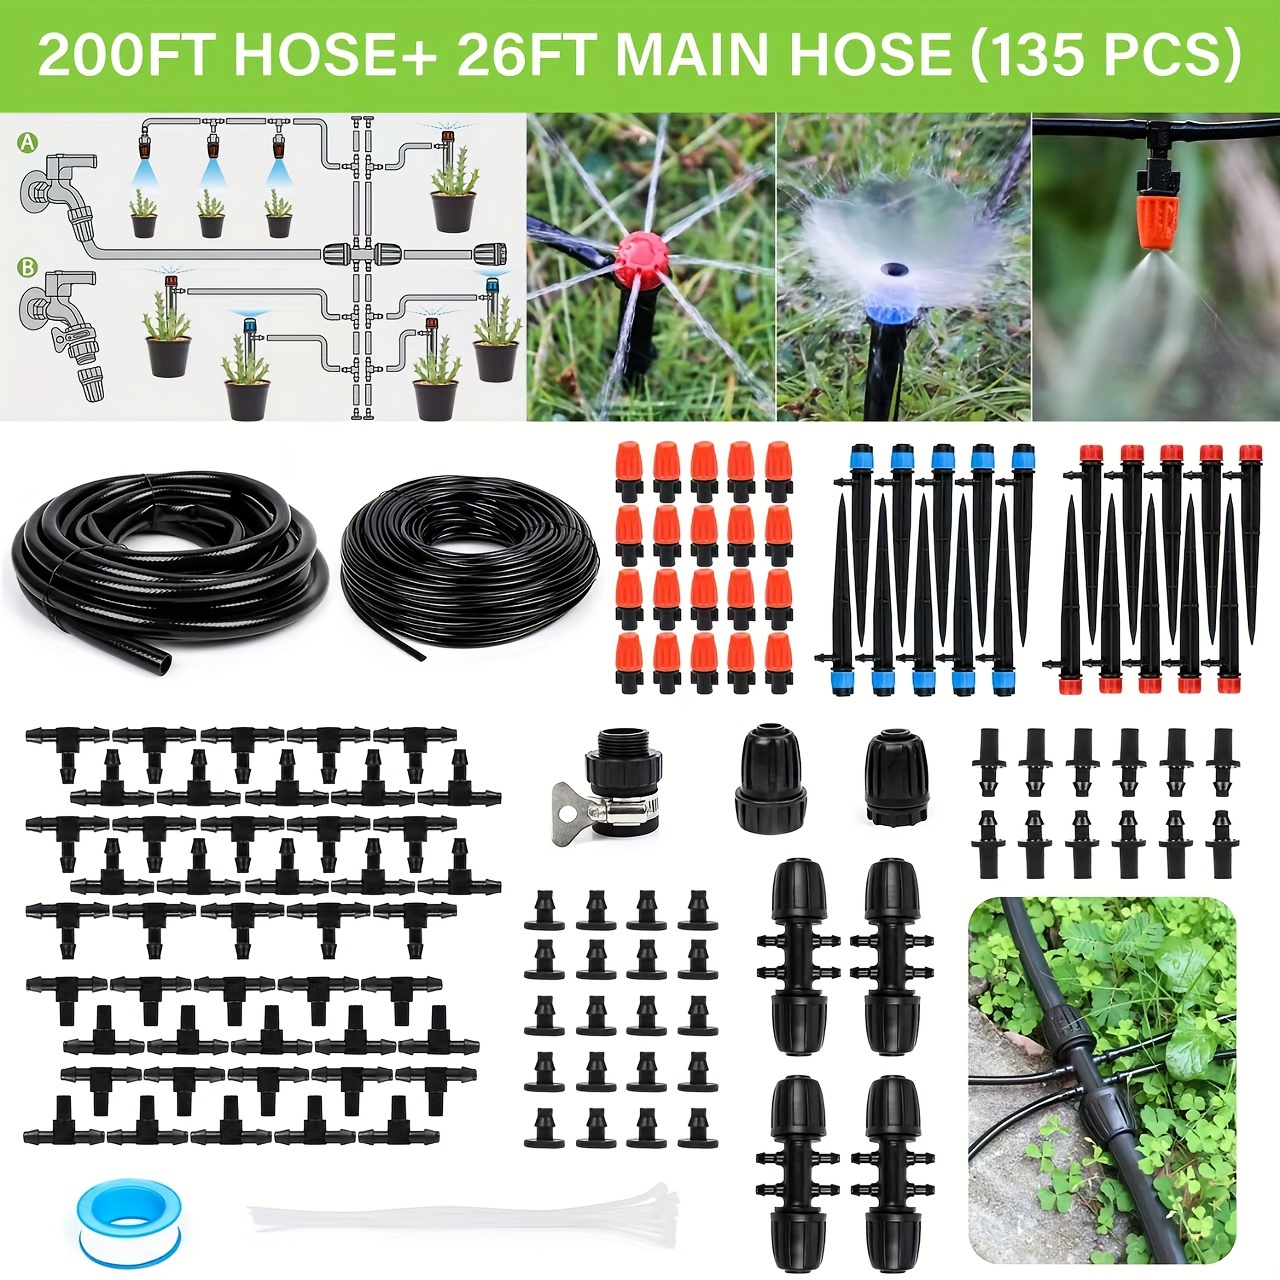 

226ft Greenhouse Micro Drip Irrigation Kit Automatic Irrigation System Patio Misting Plant Watering System With 1/4 Inch 1/2 Inch Irrigation Tubing Hose Adjustable Nozzle Emitters Barbed Fittings